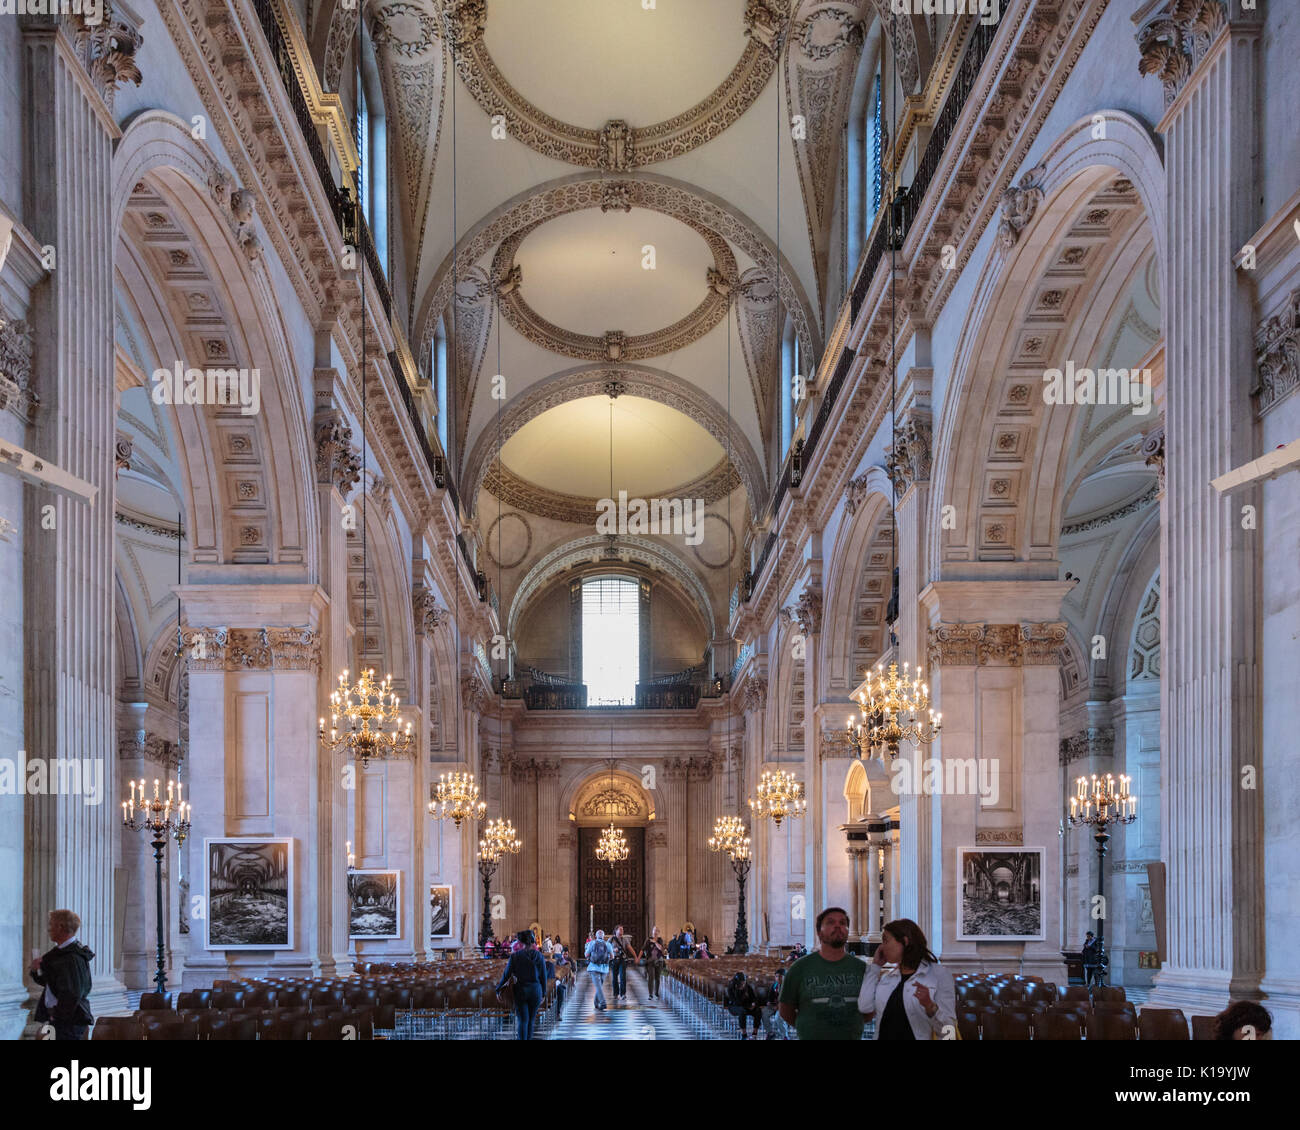 Tourists and visitors admire the interior and nave at St Paul's Cathedral, London UK Stock Photo